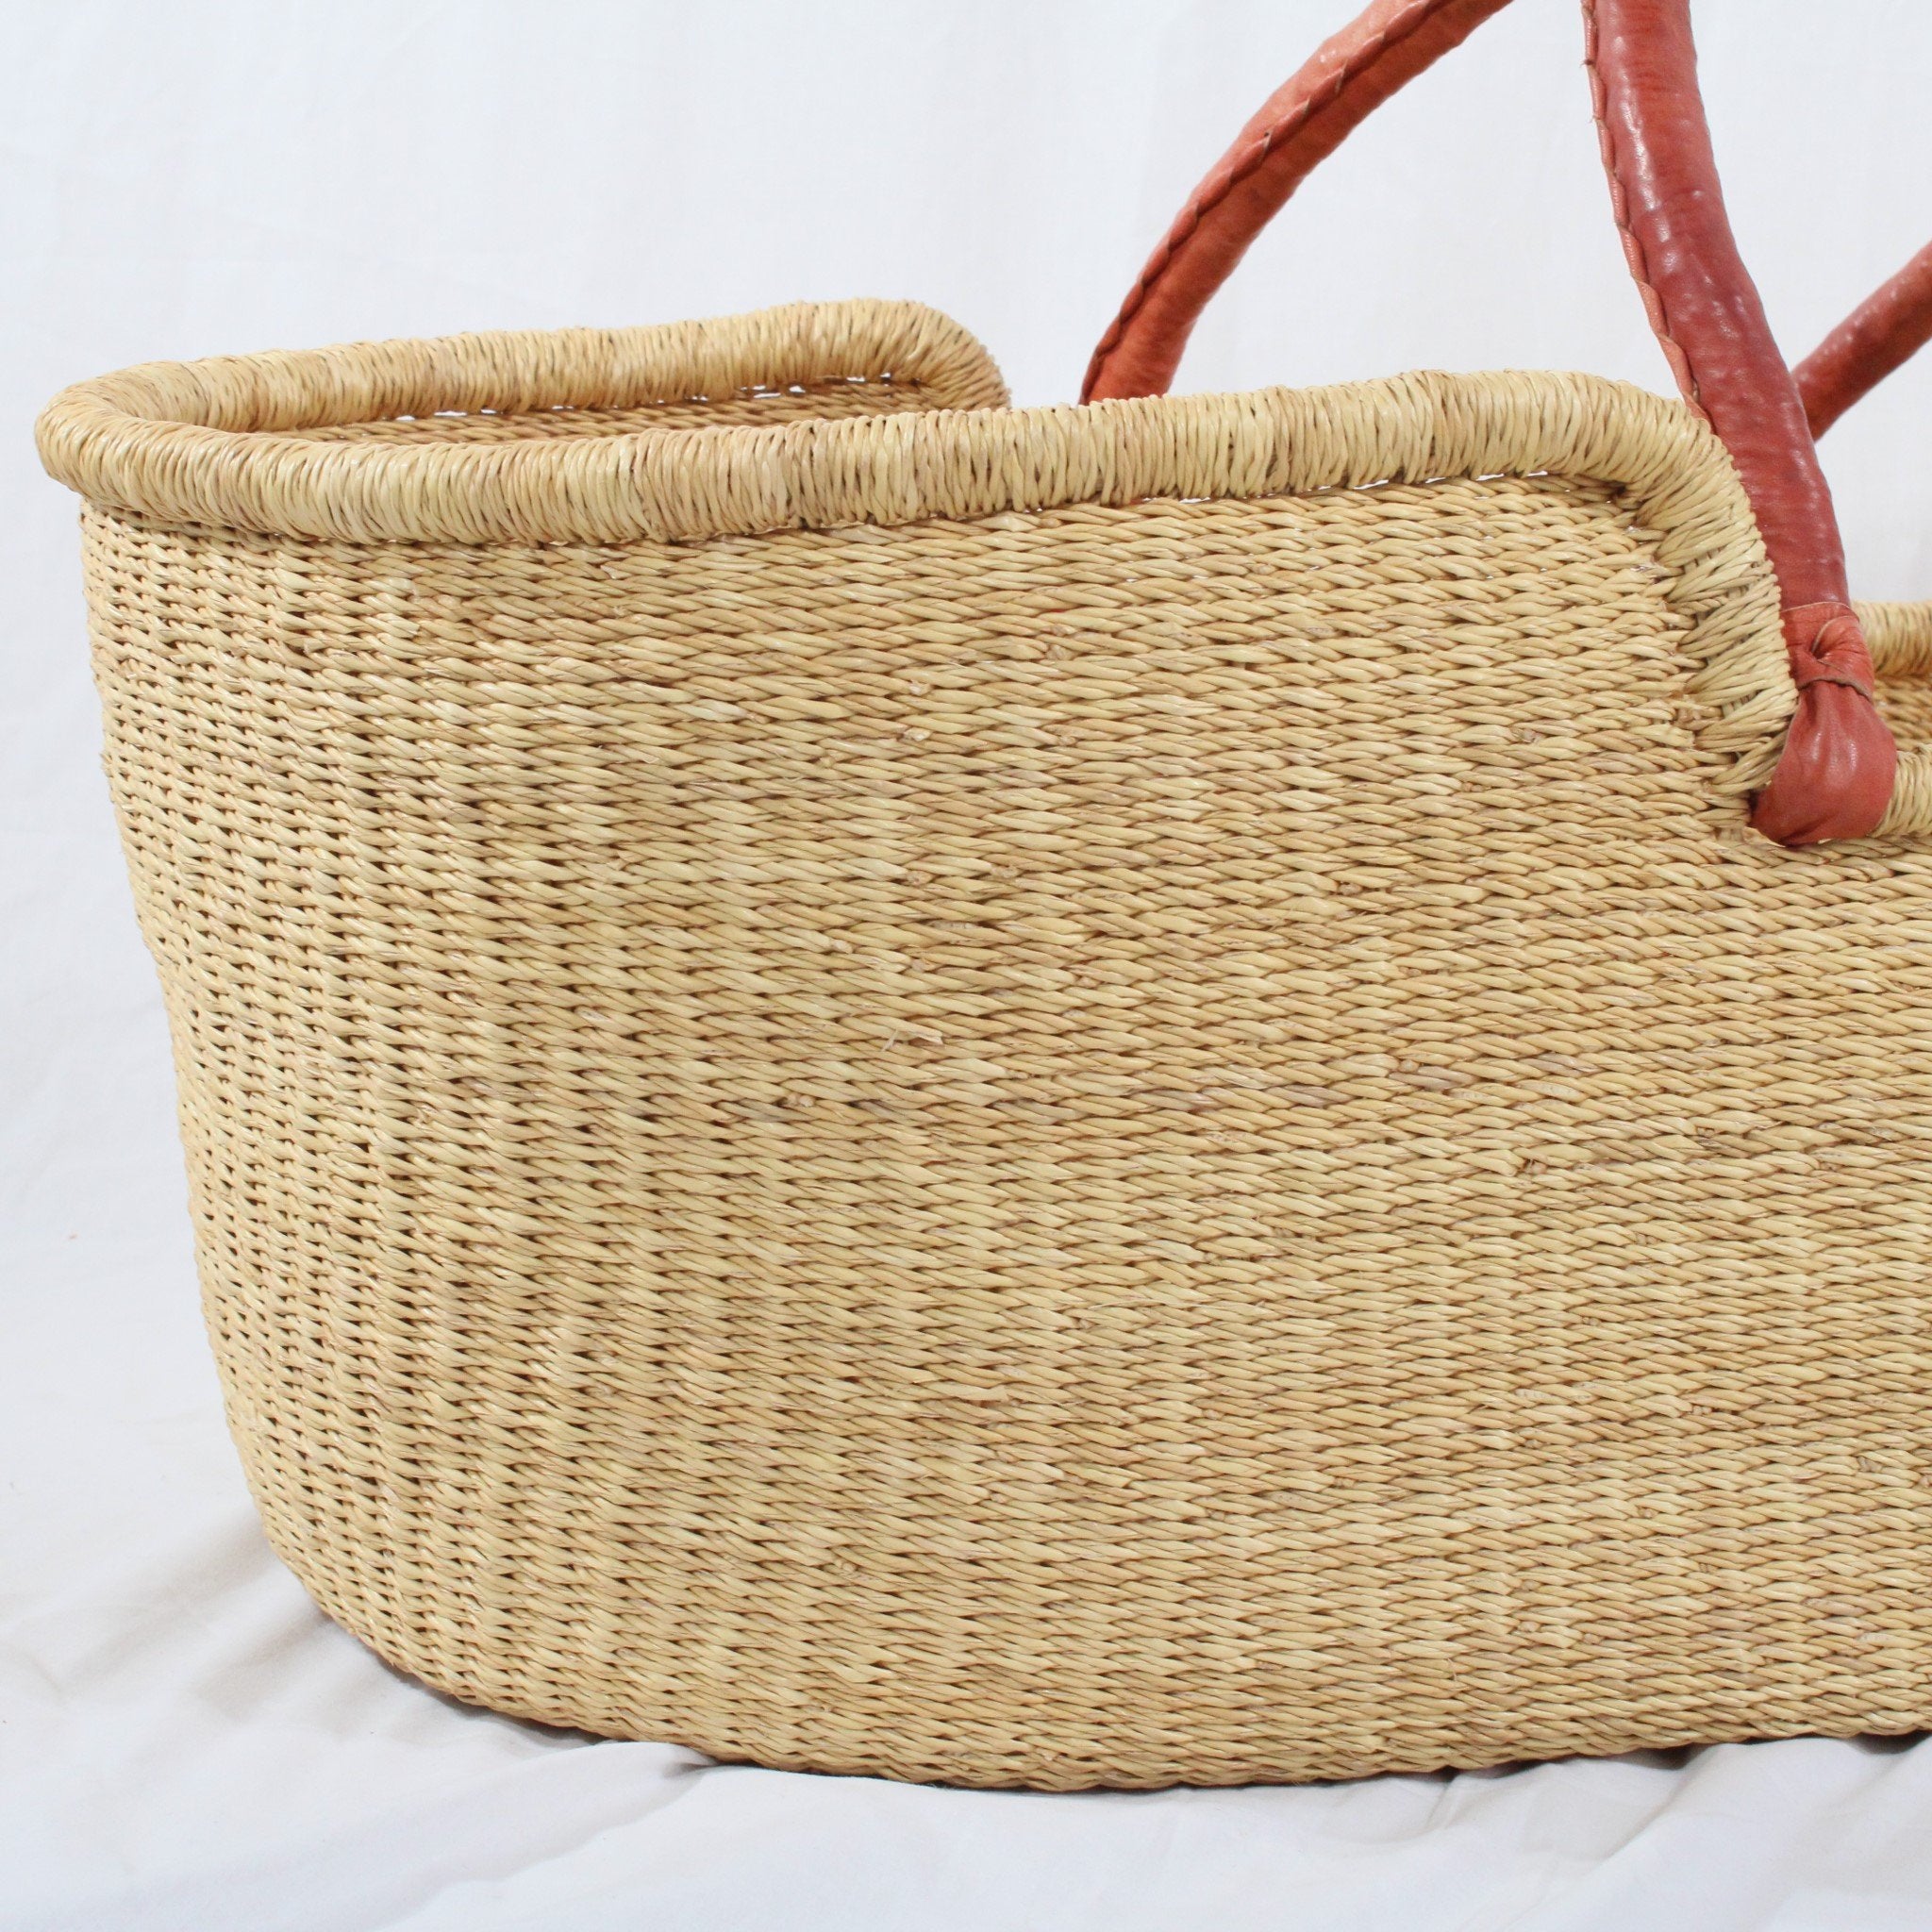 Esi handwoven moses basket with tan leather handles including  mattress and liner